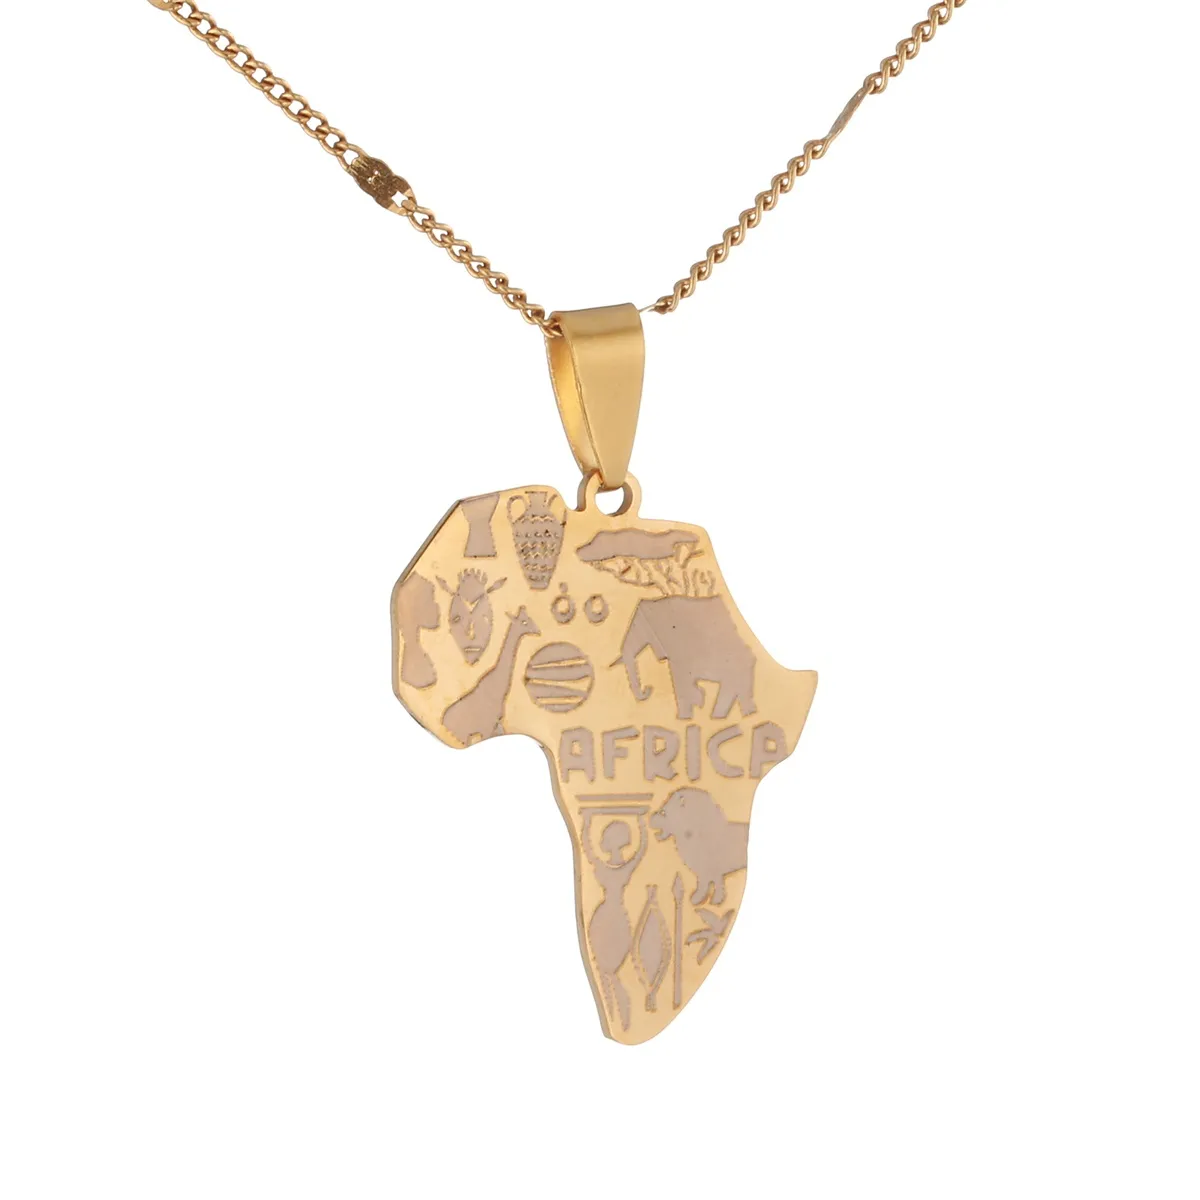 Stainless Steel Africa Map Pendant Necklaces Trendy Jewelry Map of African Elephants Lions Giraffes for Women